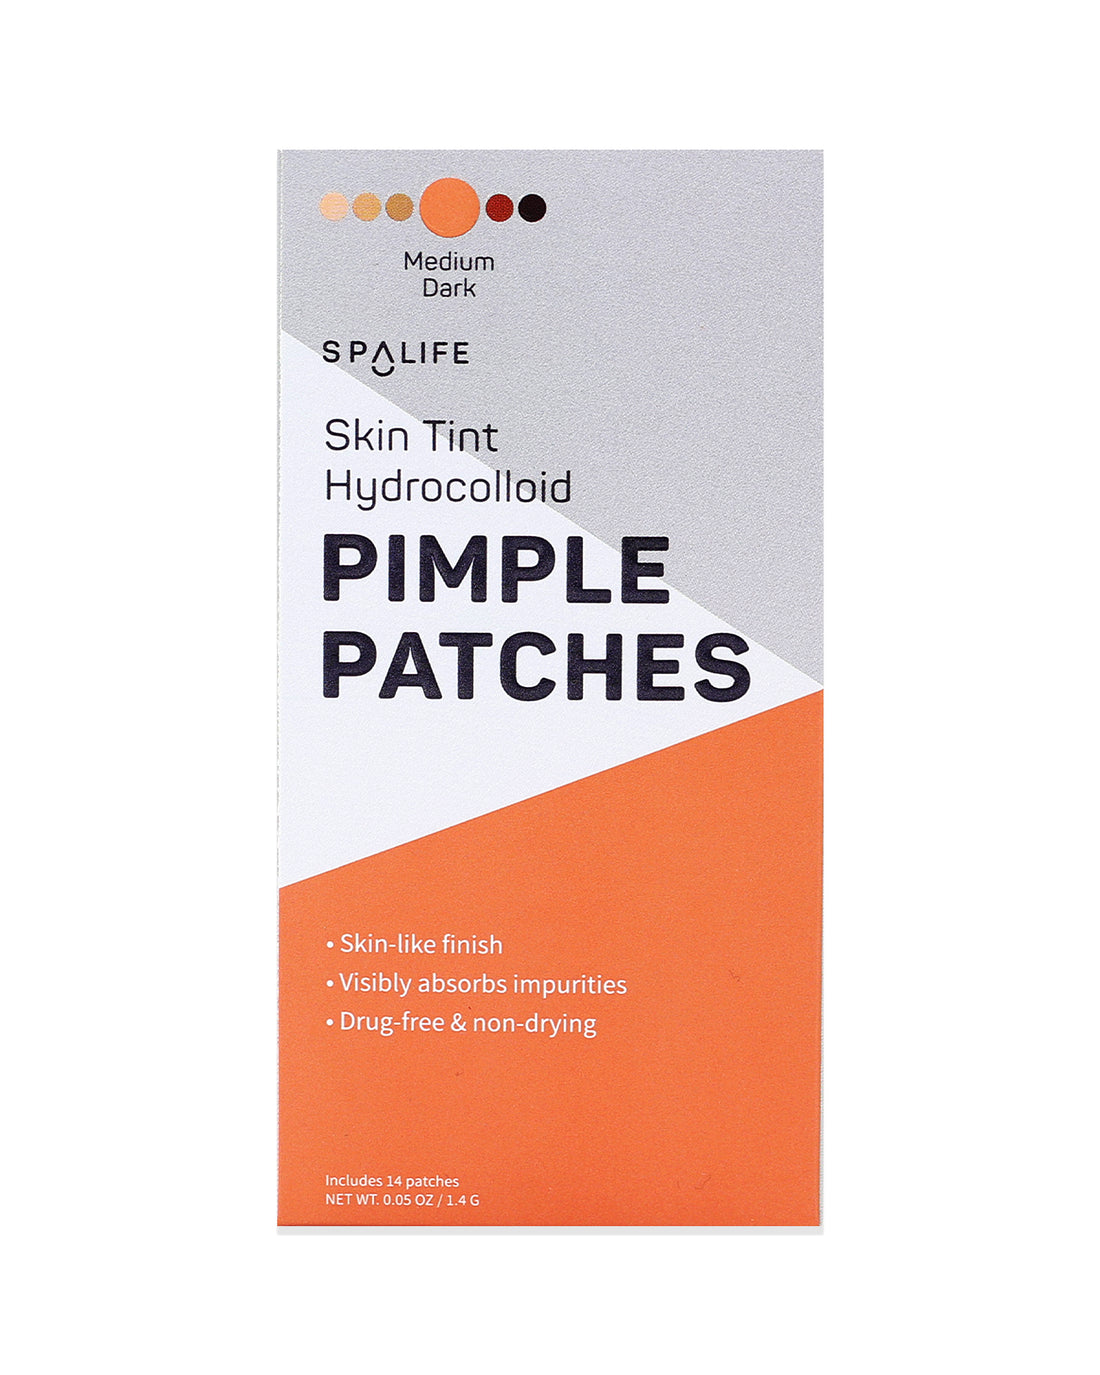 Skin_tint_pimple_patches_packe-549